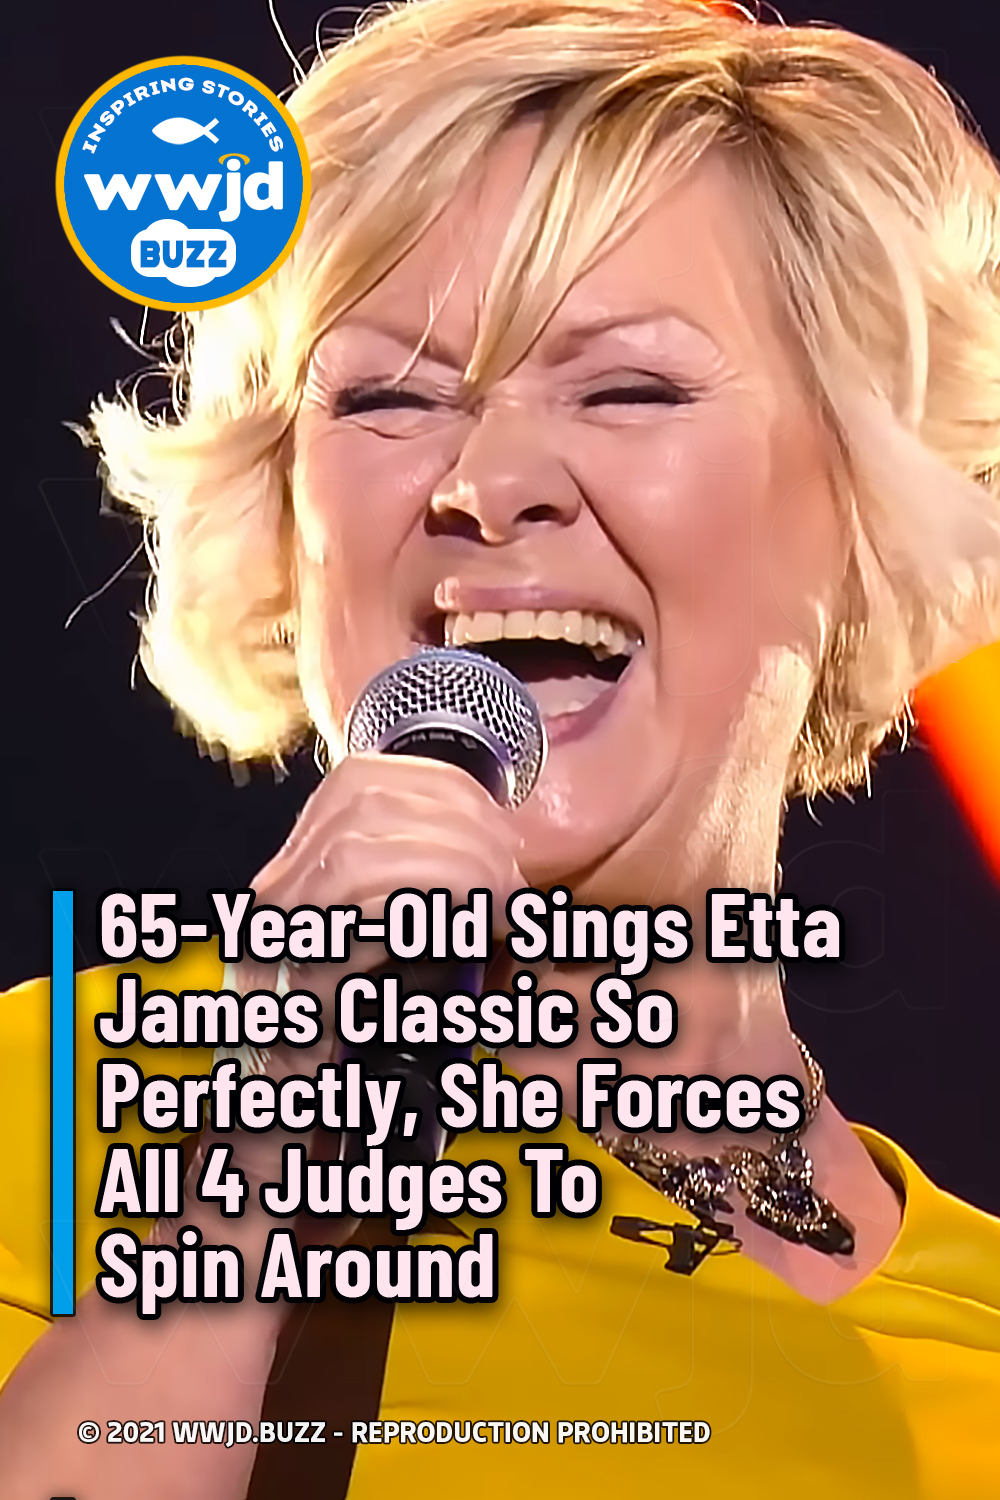 65-Year-Old Sings Etta James Classic So Perfectly, She Forces All 4 Judges To Spin Around